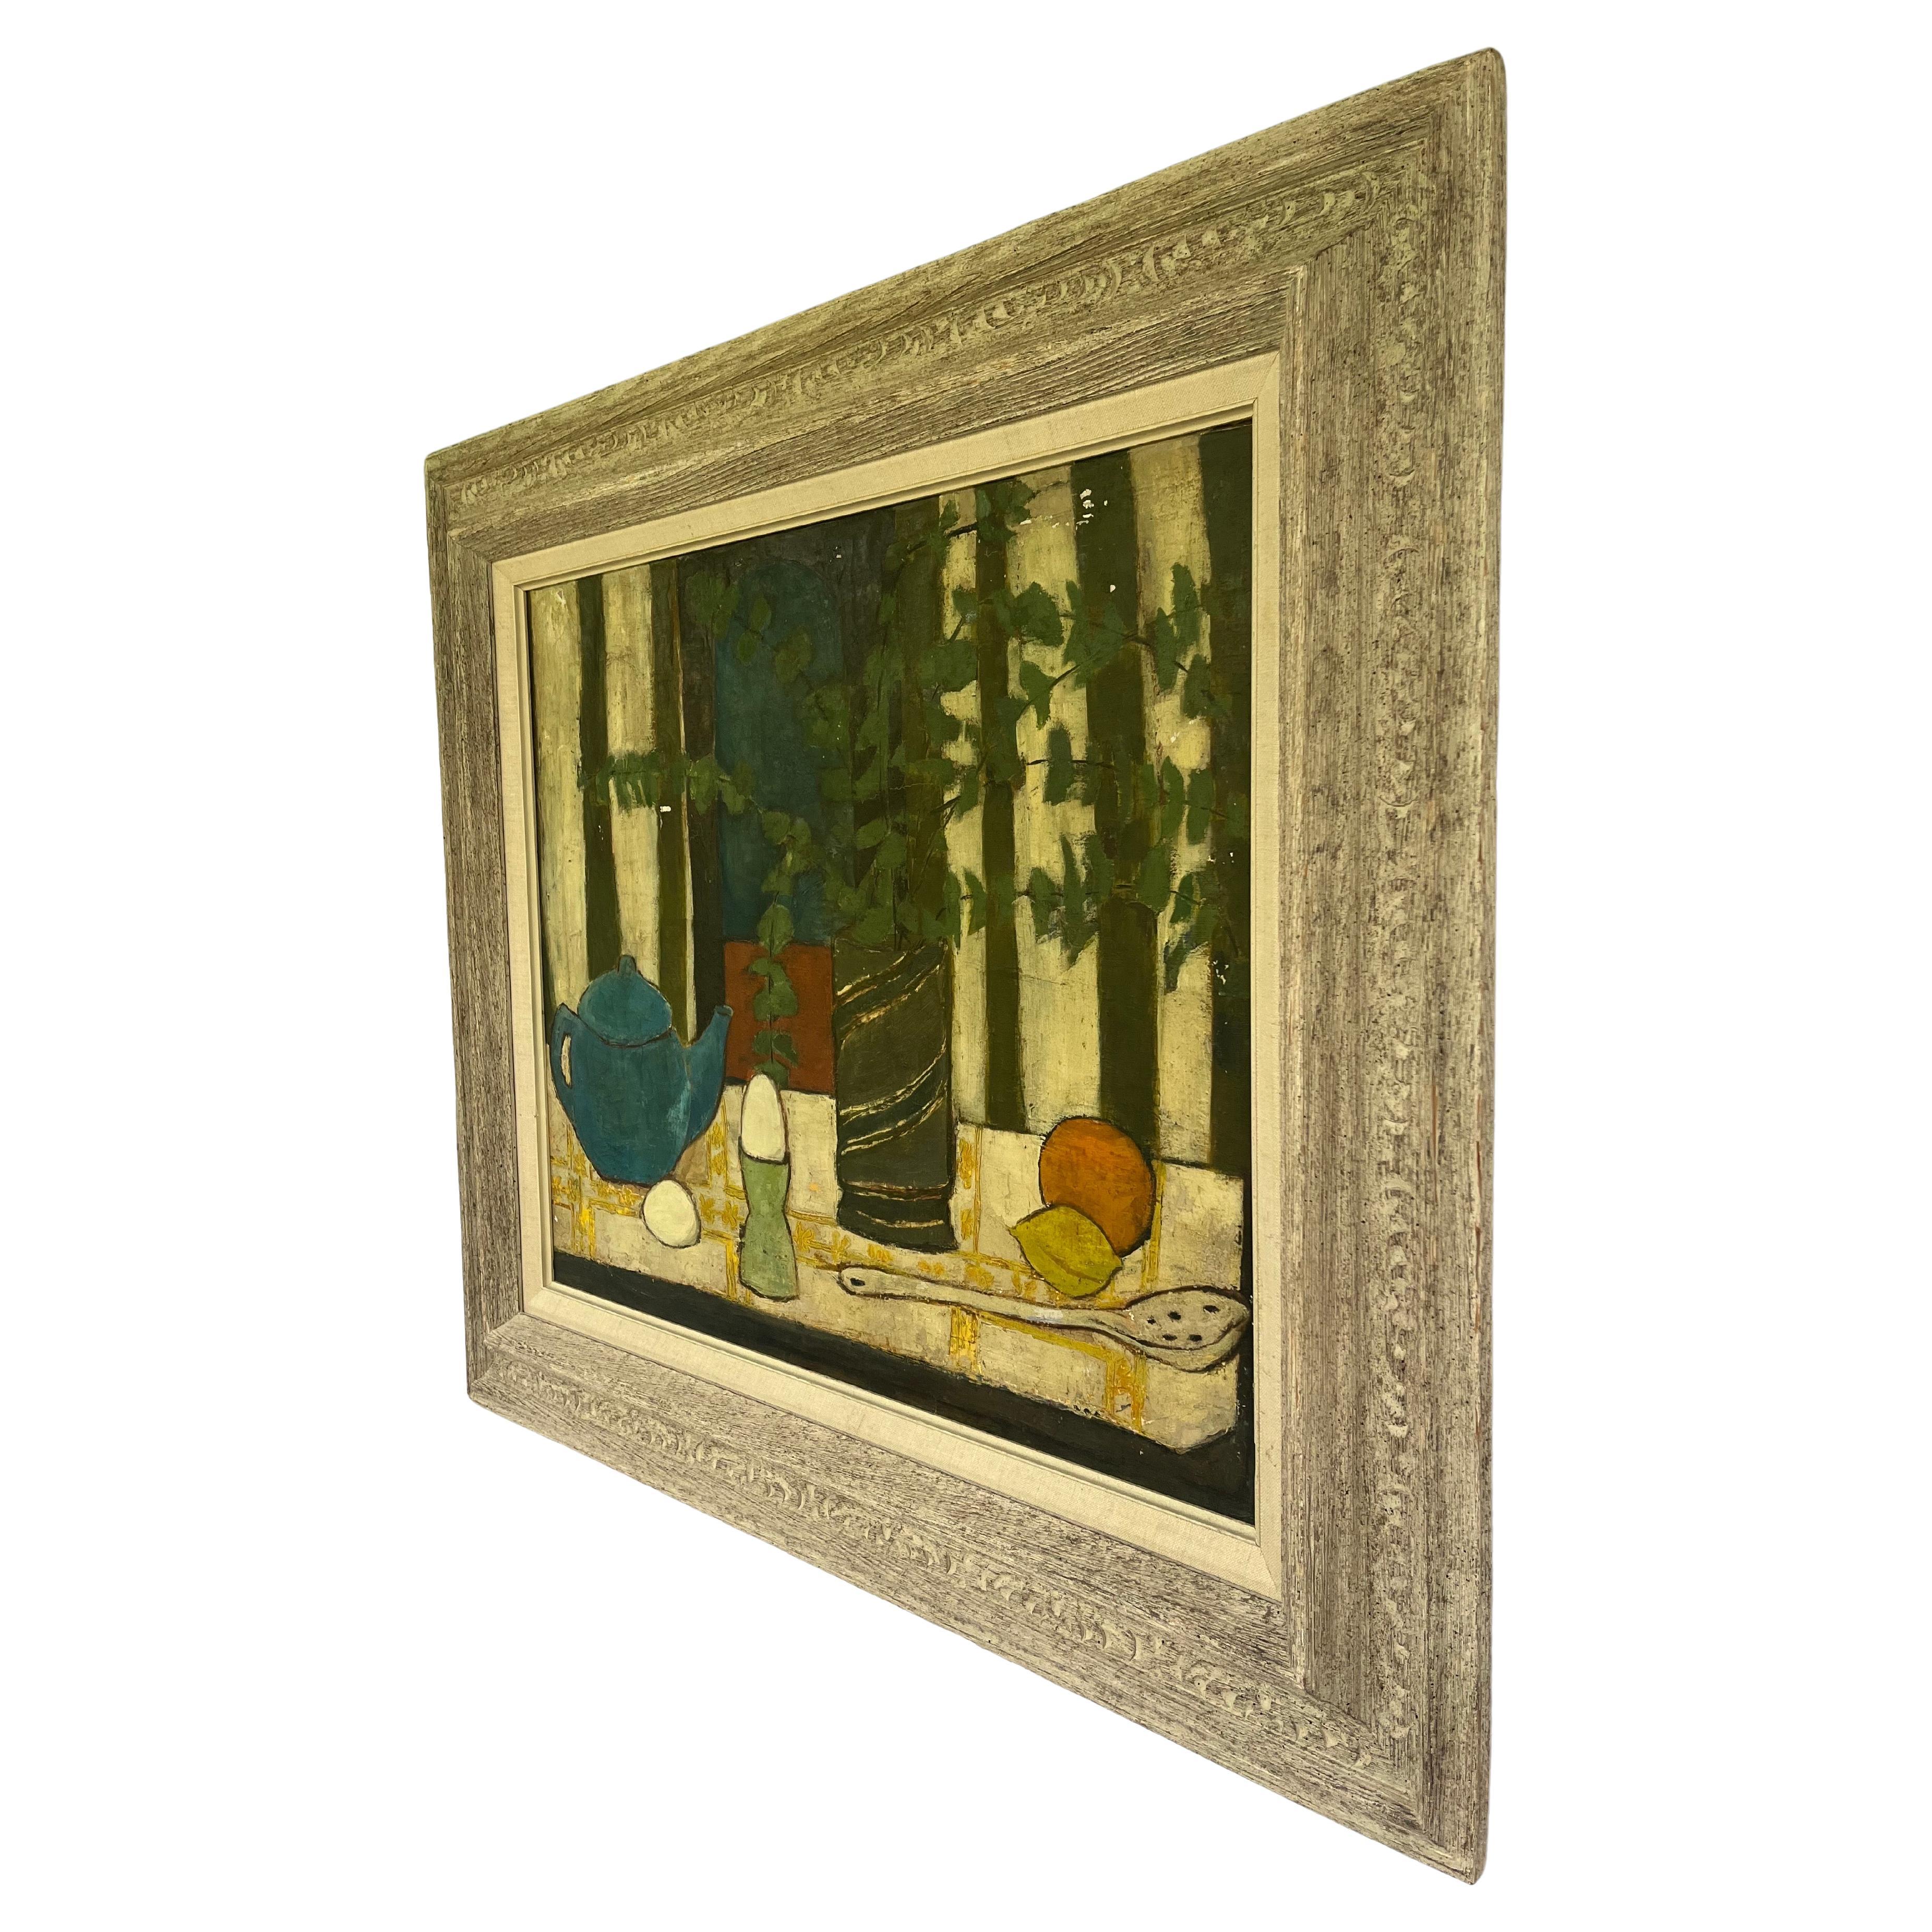 A fresh and modern, mid 20th century still life painting in a period frame, circa 1950's. The work depicts a beautiful tablescape with a flattened perspective. Each of the individual items is shown to the viewer with immediacy and excitement. The